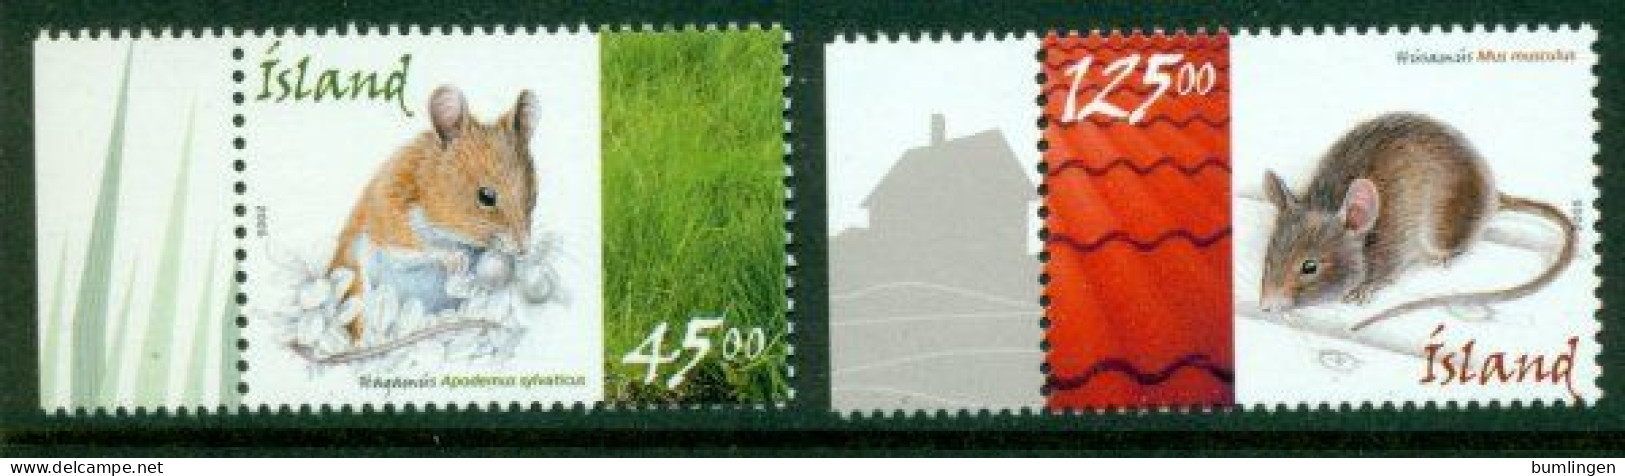 ICELAND 2005 Mi 1087-88** Mices [B640] - Rodents